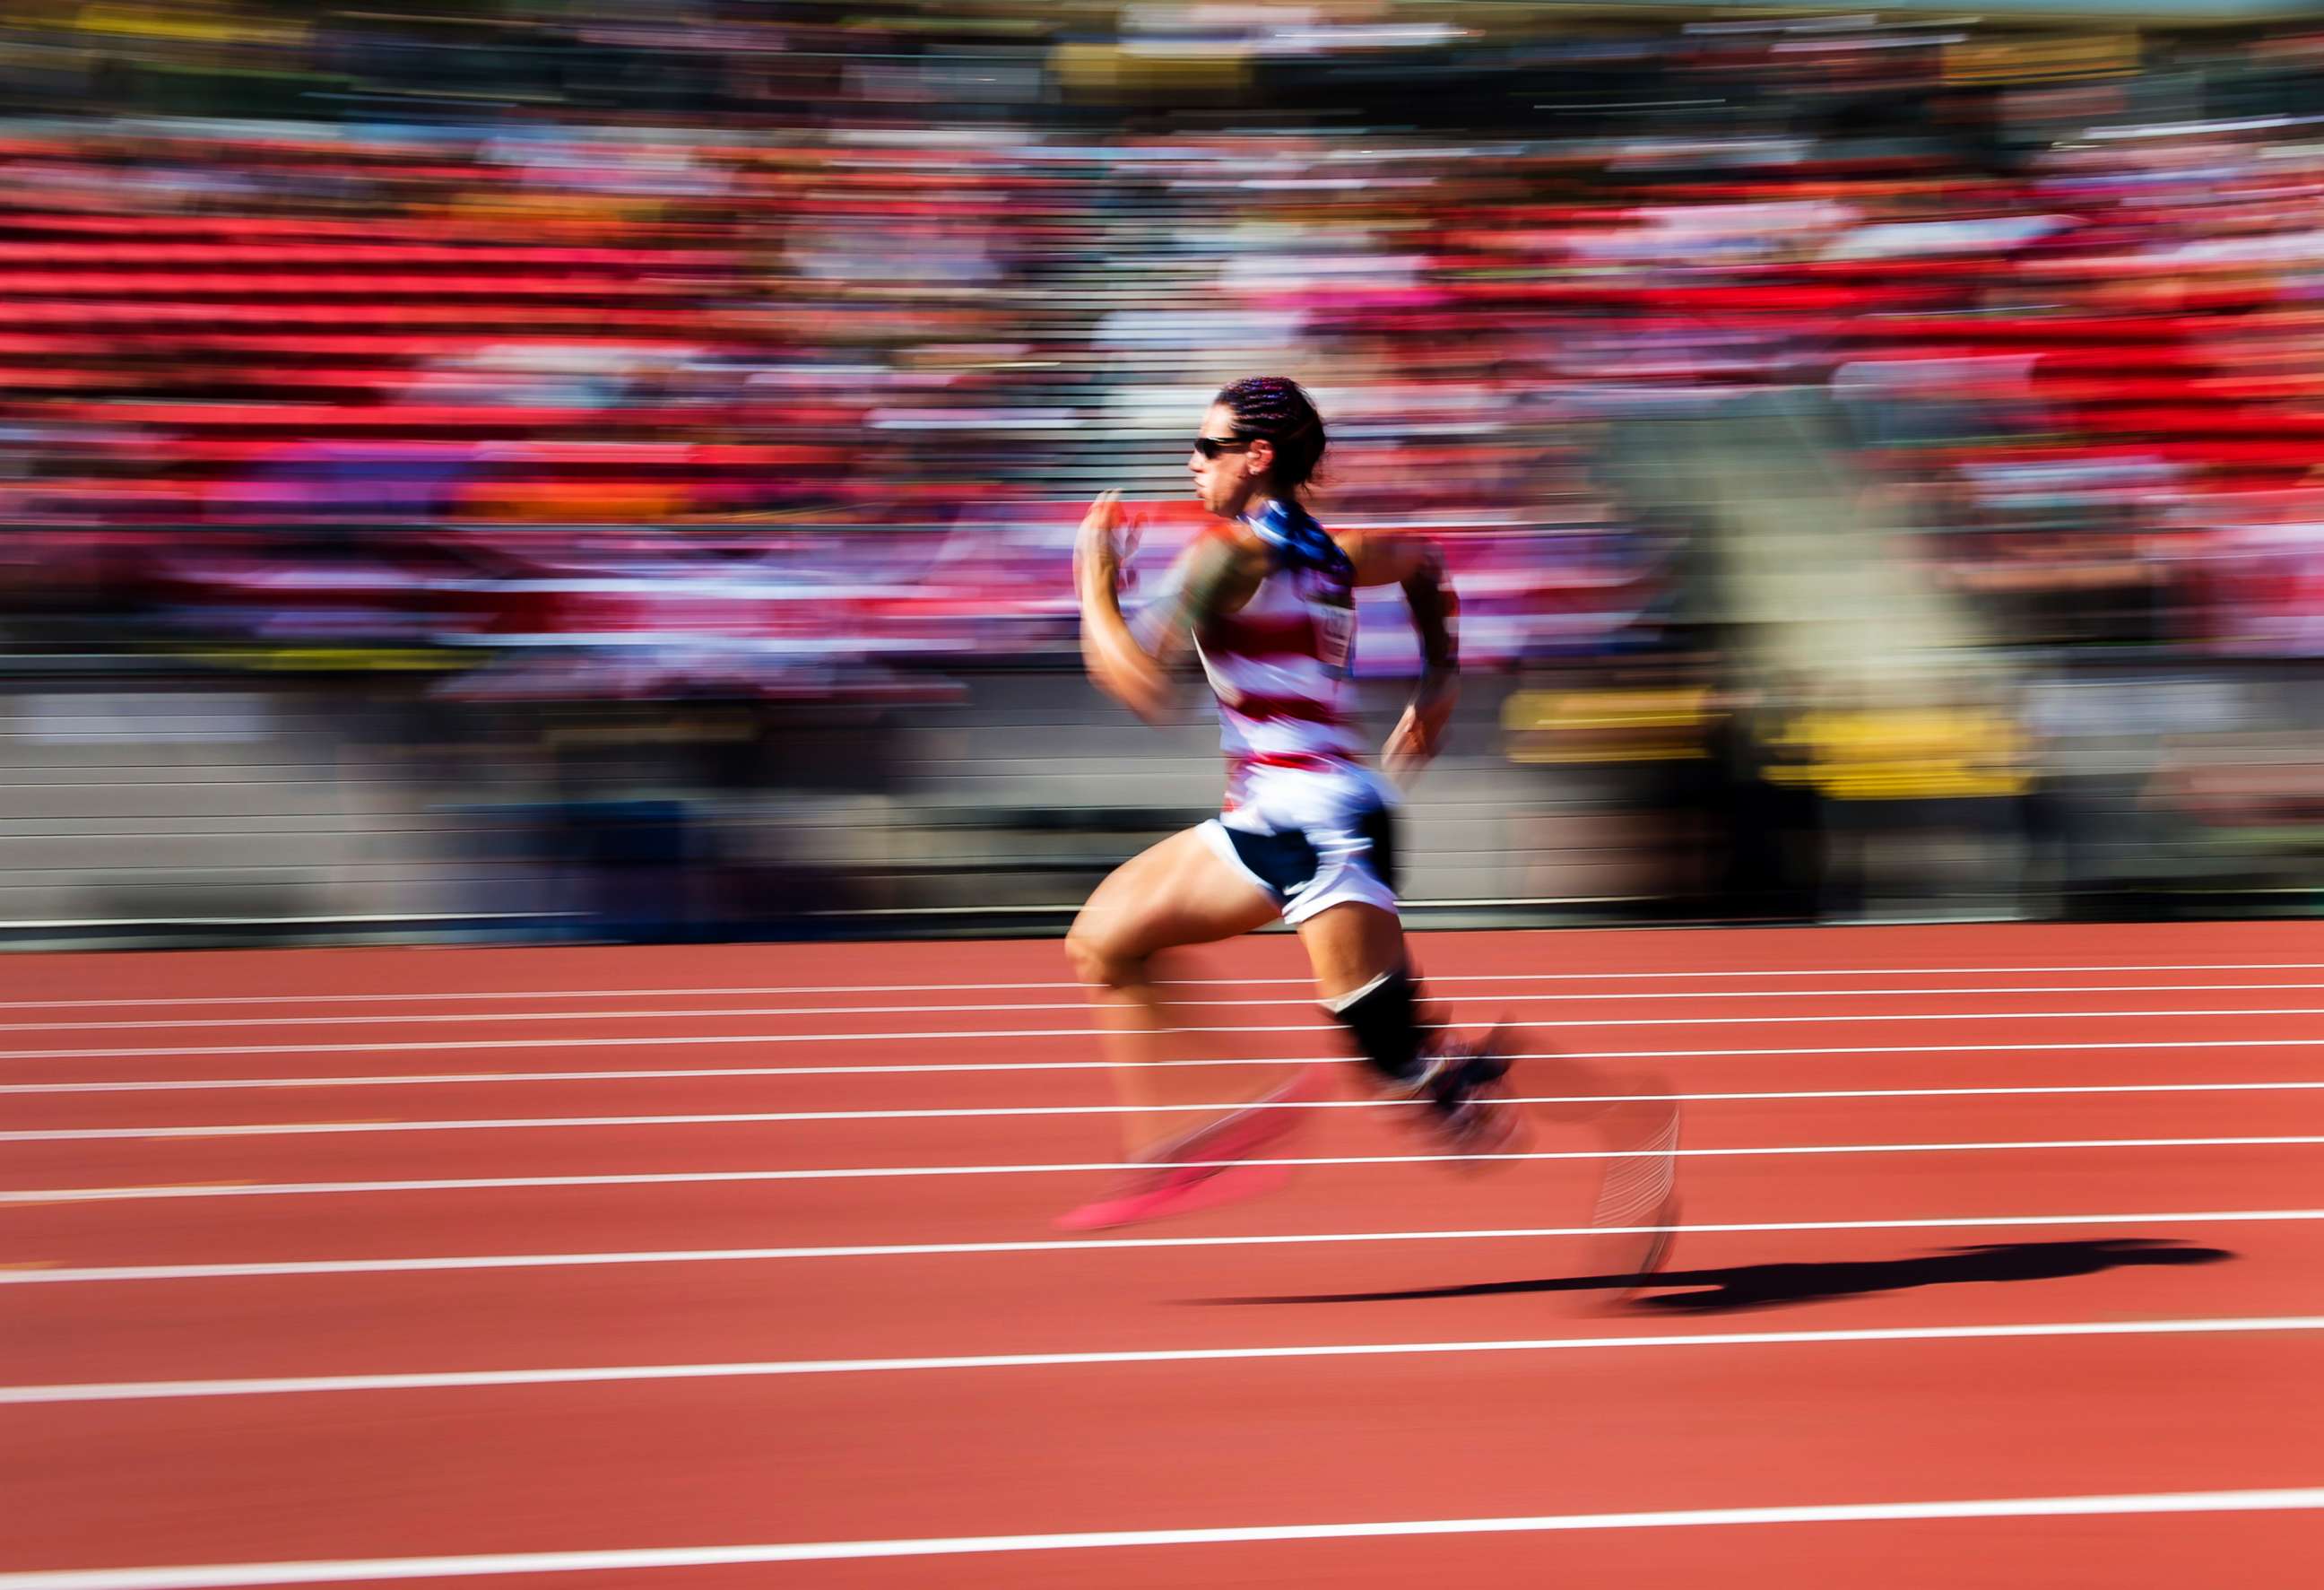 PHOTO: Sarah Rudder of the United States races to a gold medal in the women's 100 meter dash during the Invictus Games in Toronto, Sept. 24, 2017. 